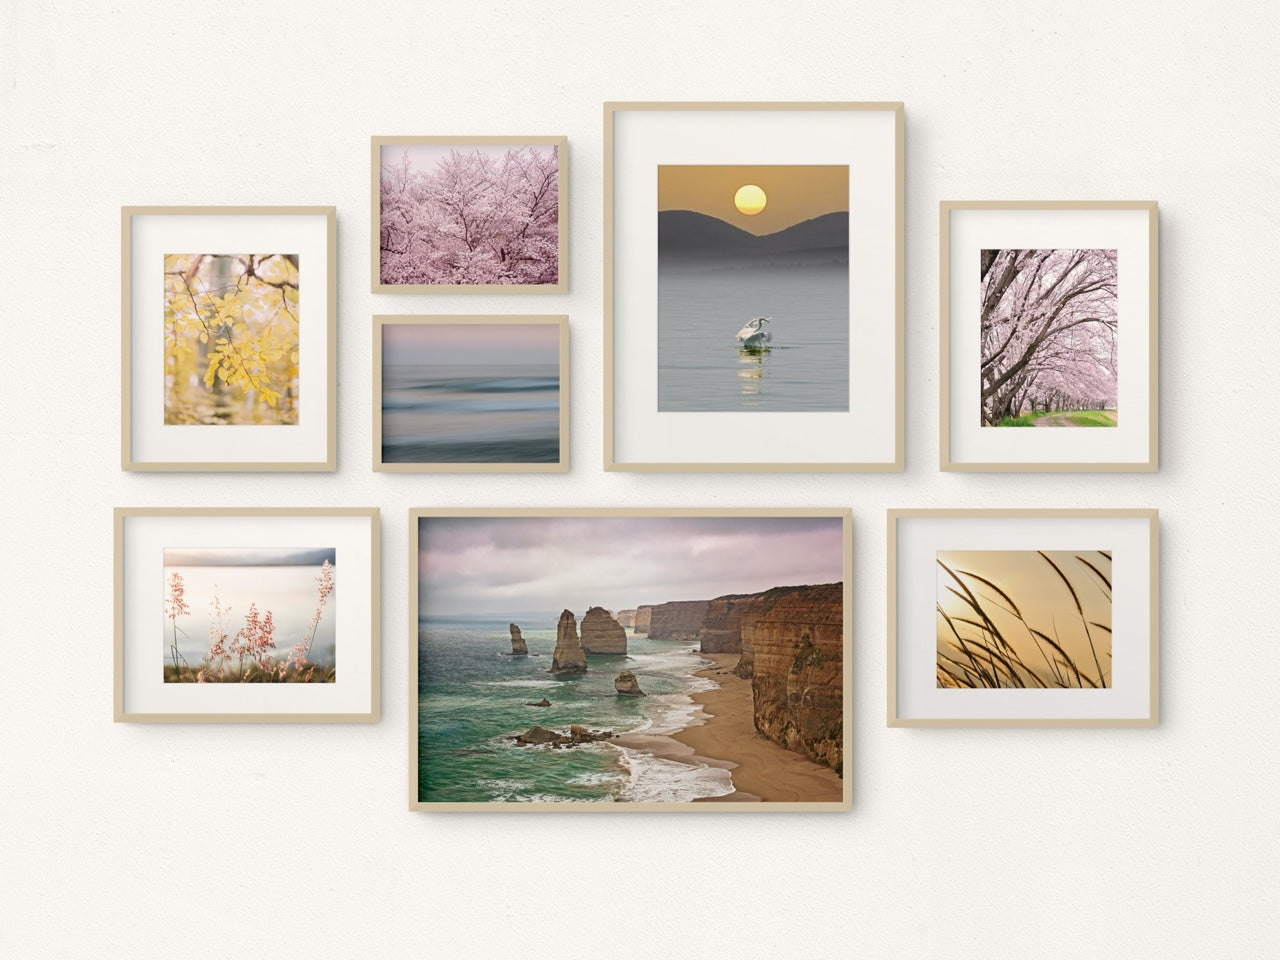 Serenity Gallery Wall  8 Piece Art Set - MK Envision Galleries